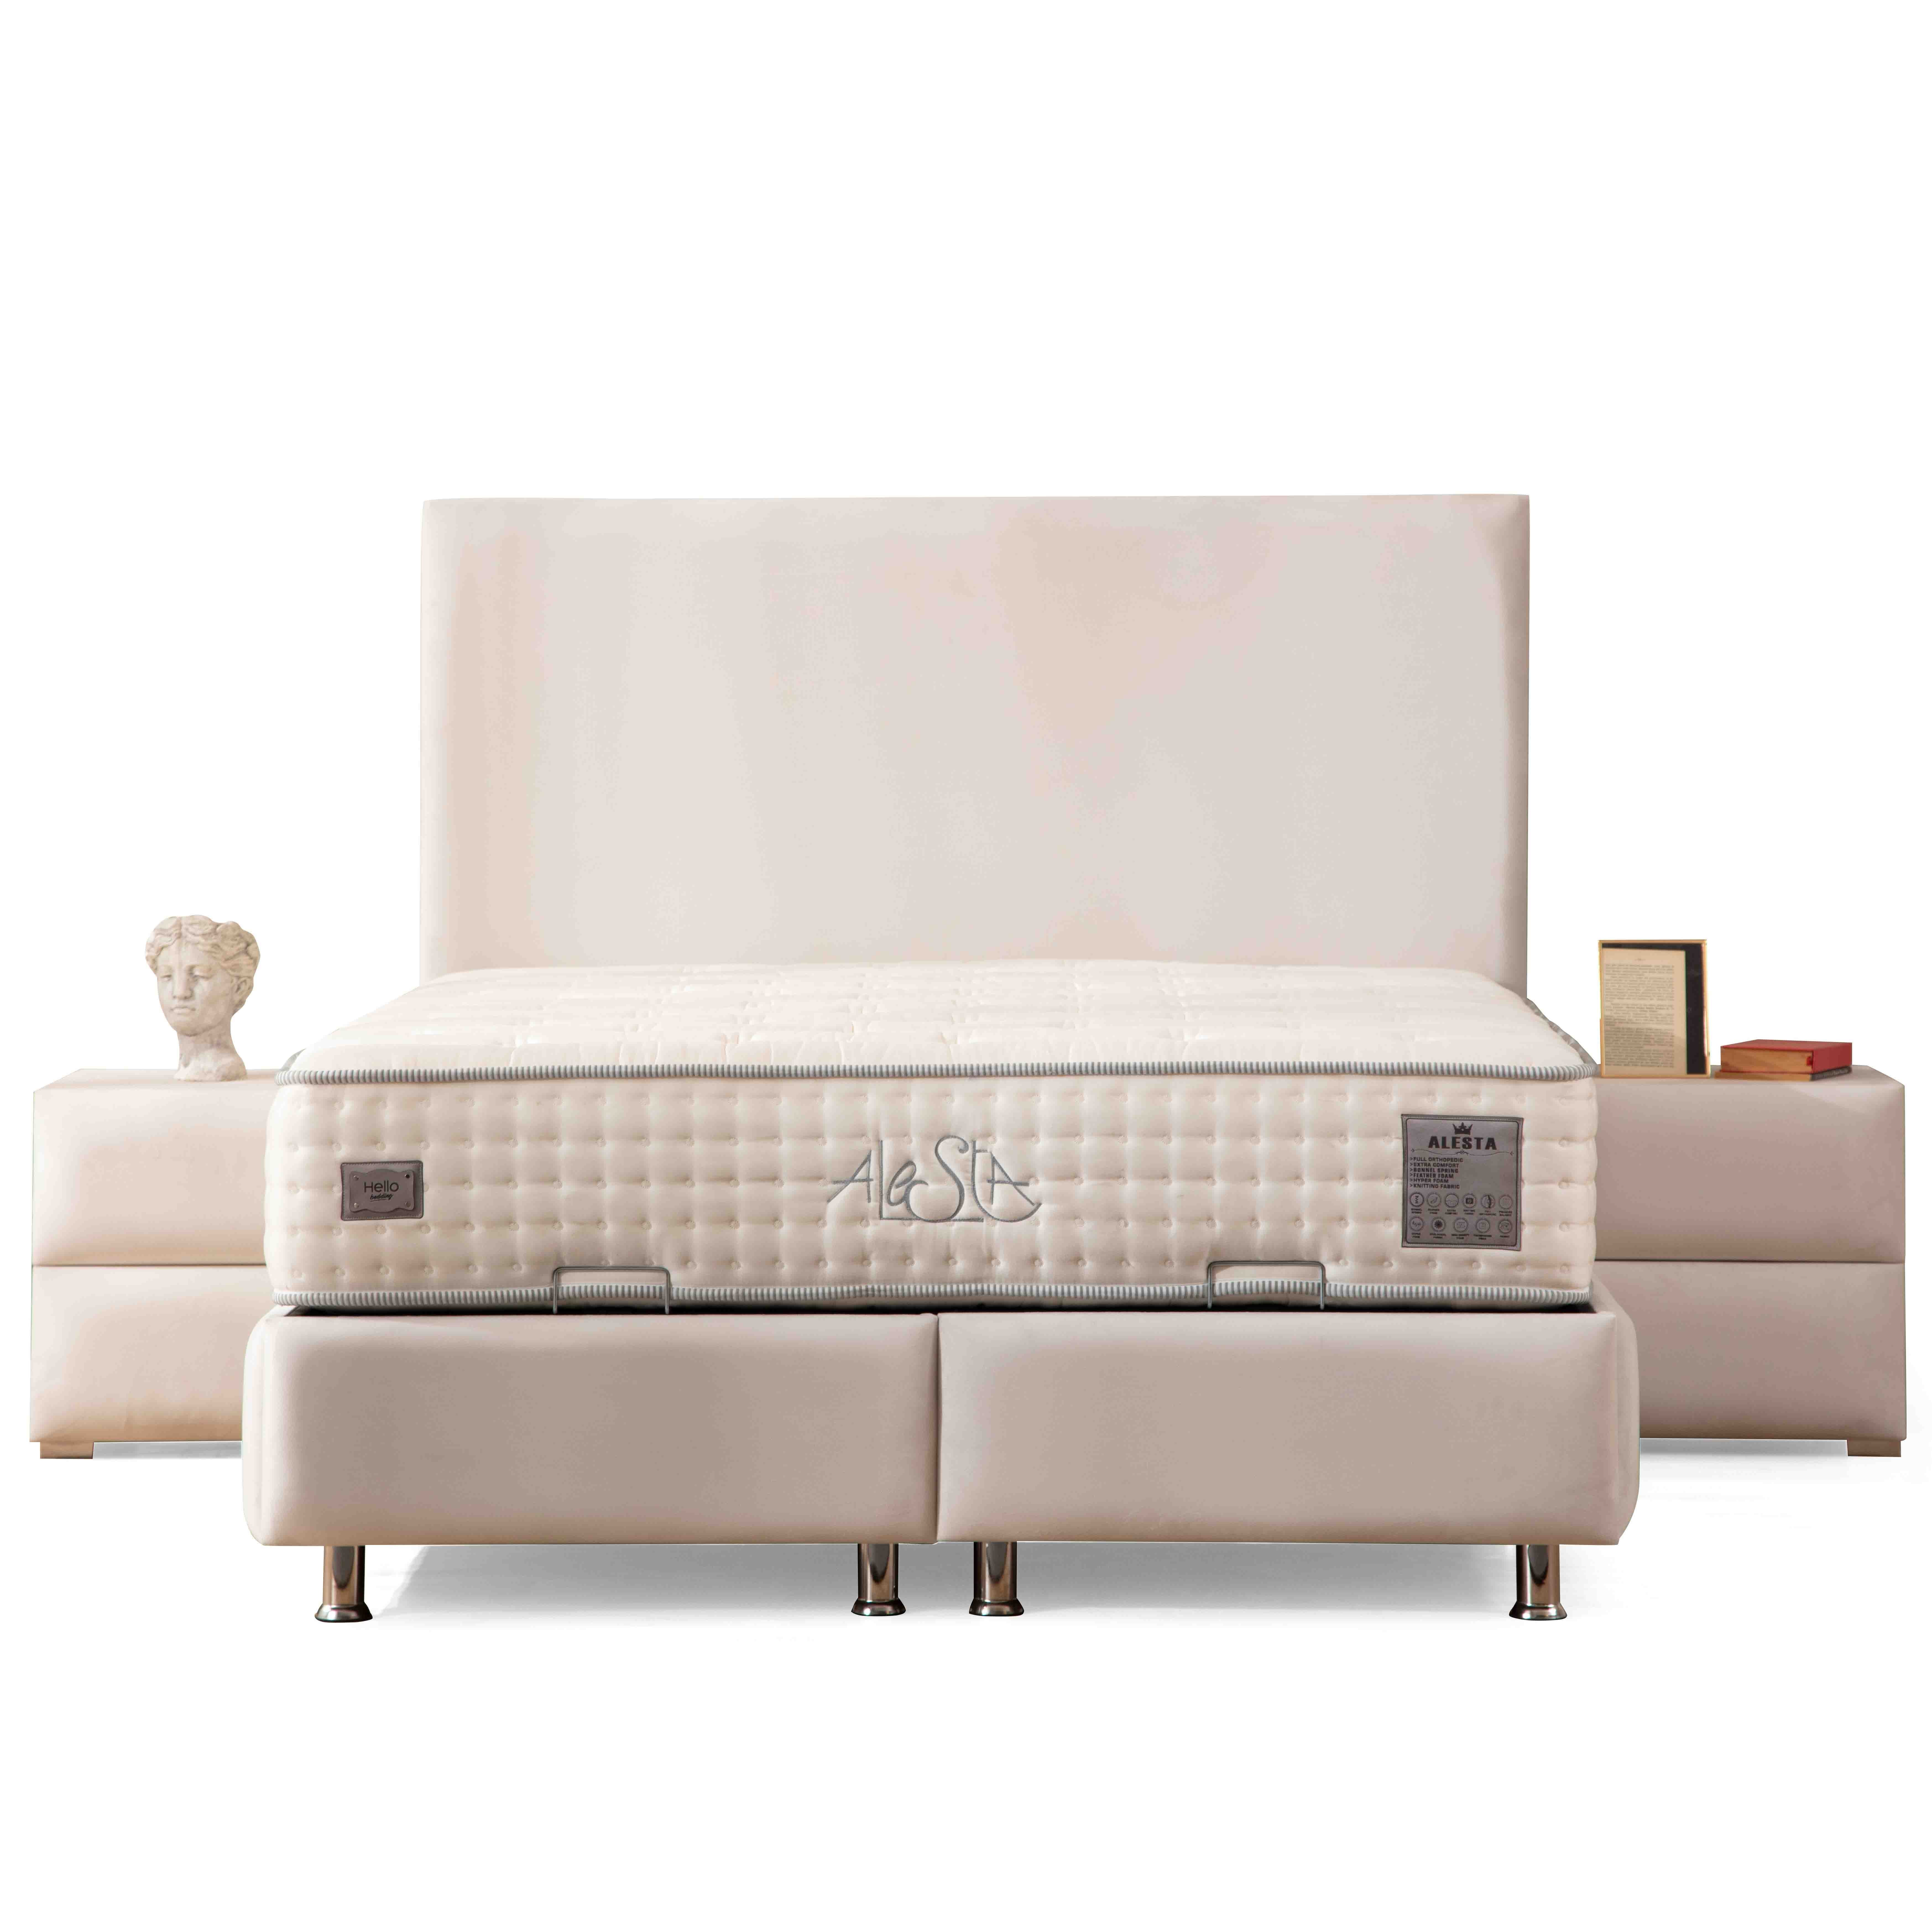 Coco Bed With Storage 90*190